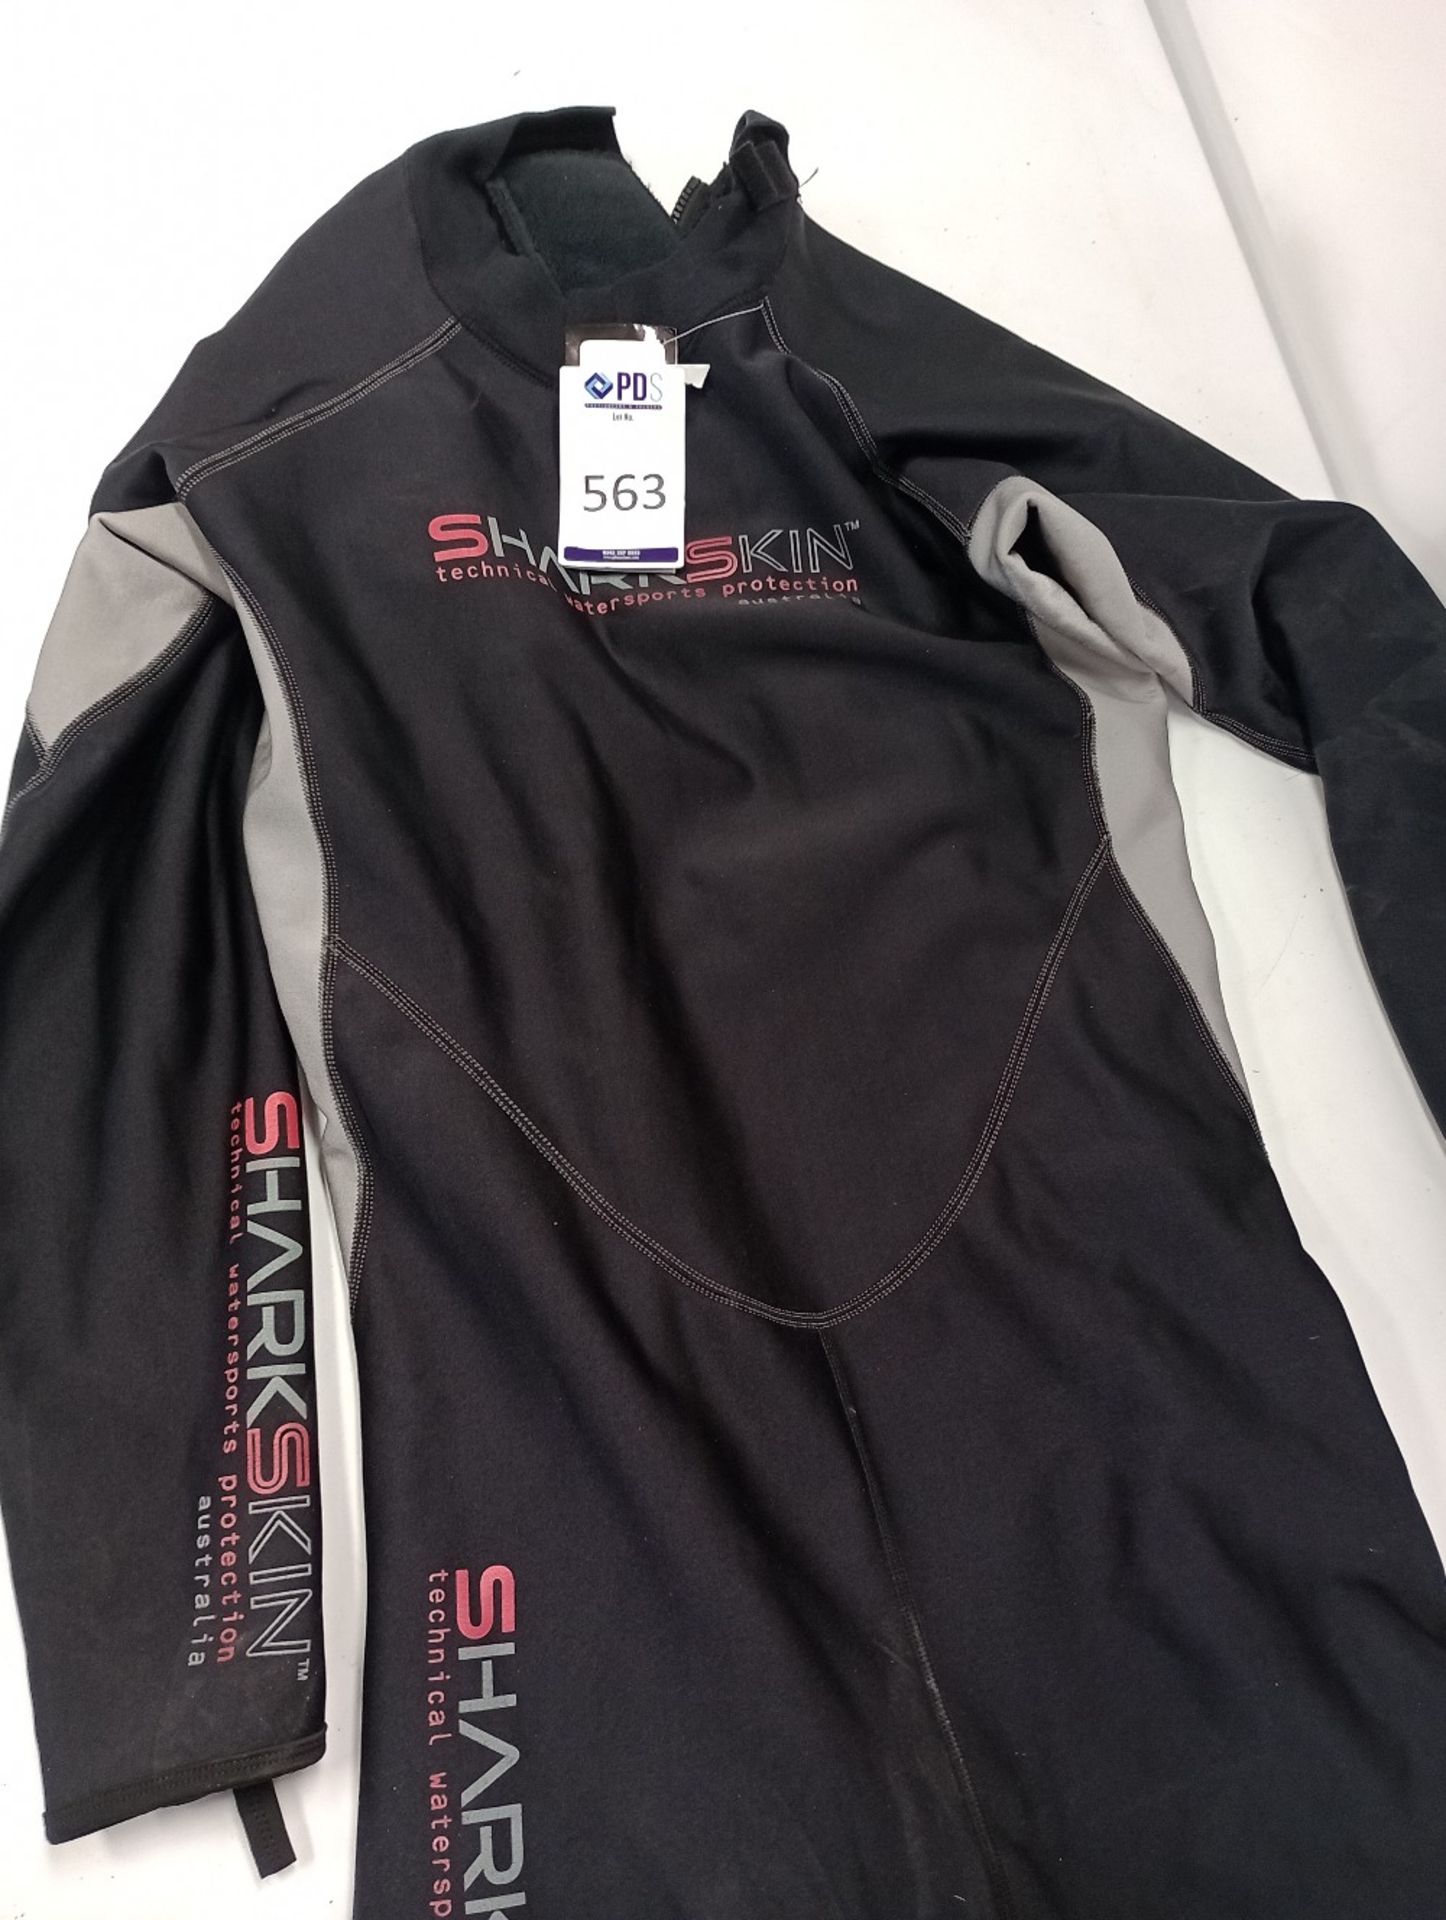 Sharkskin Technical Watersports Protection, Size 2XL (Location: Brentwood. Please Refer to General - Bild 3 aus 4